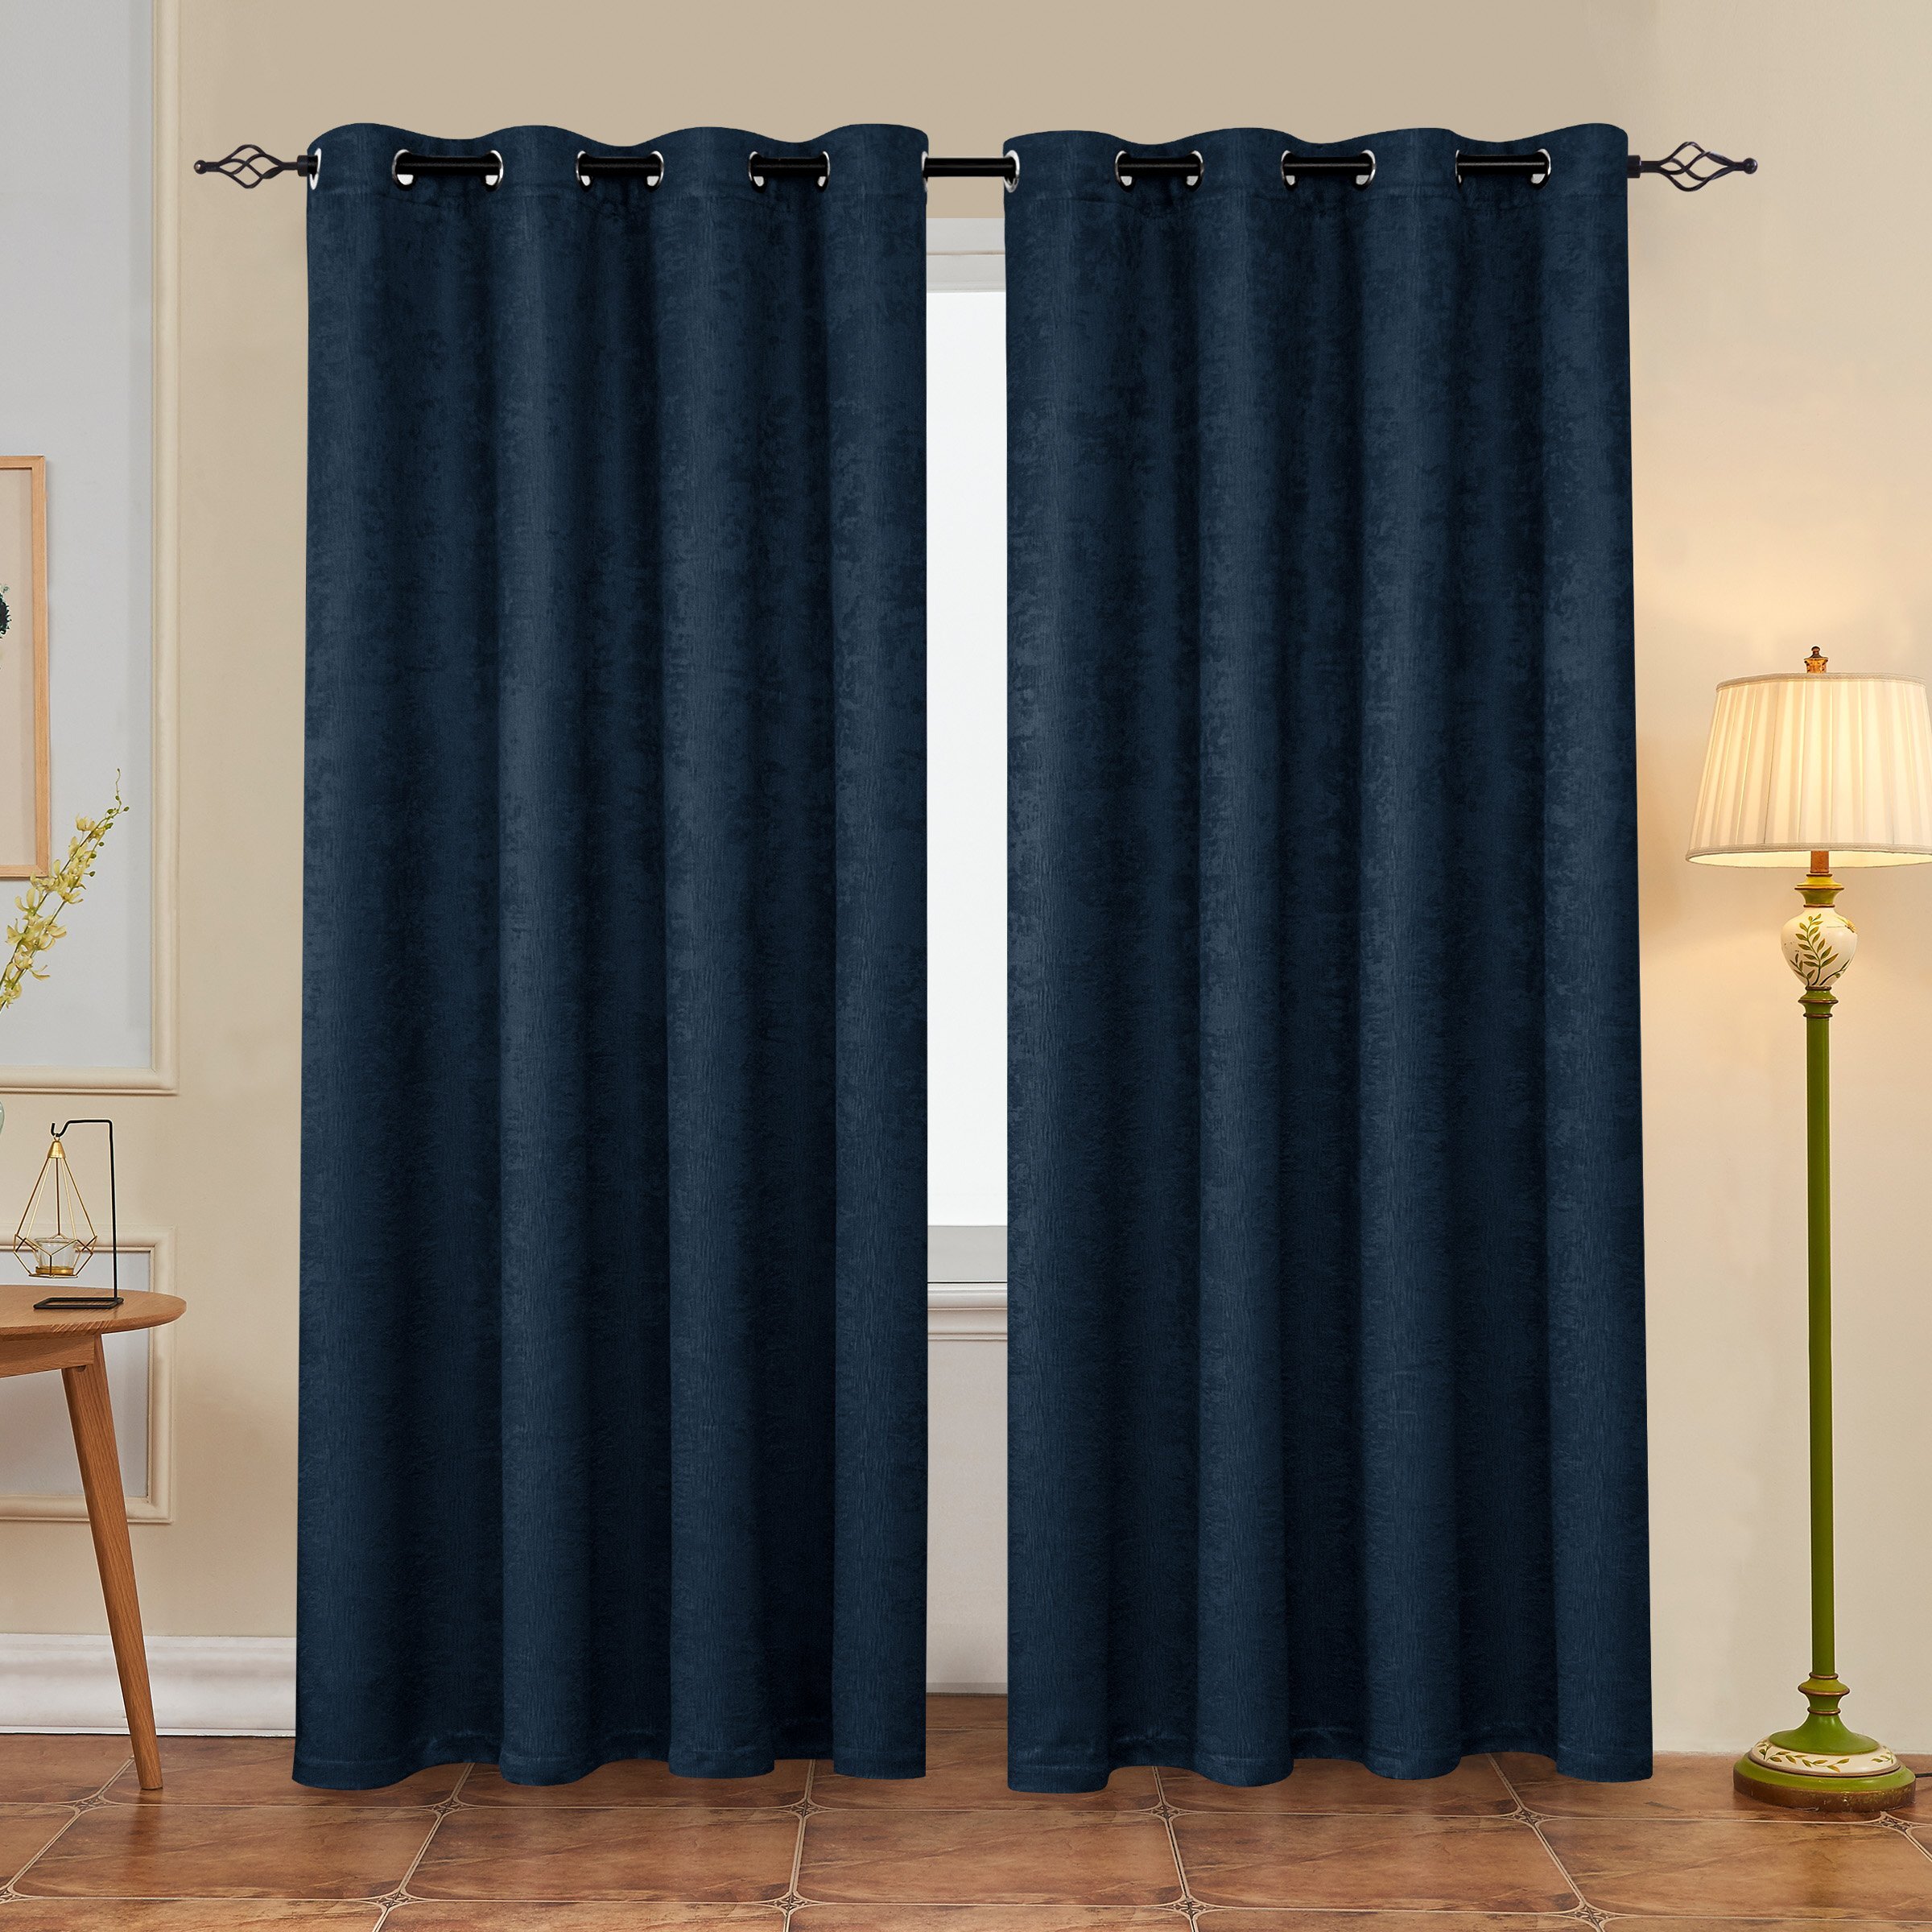 NEW Premium Embossed Grommets Thermal Weaved Blackout CurtainsNoise Reduction 